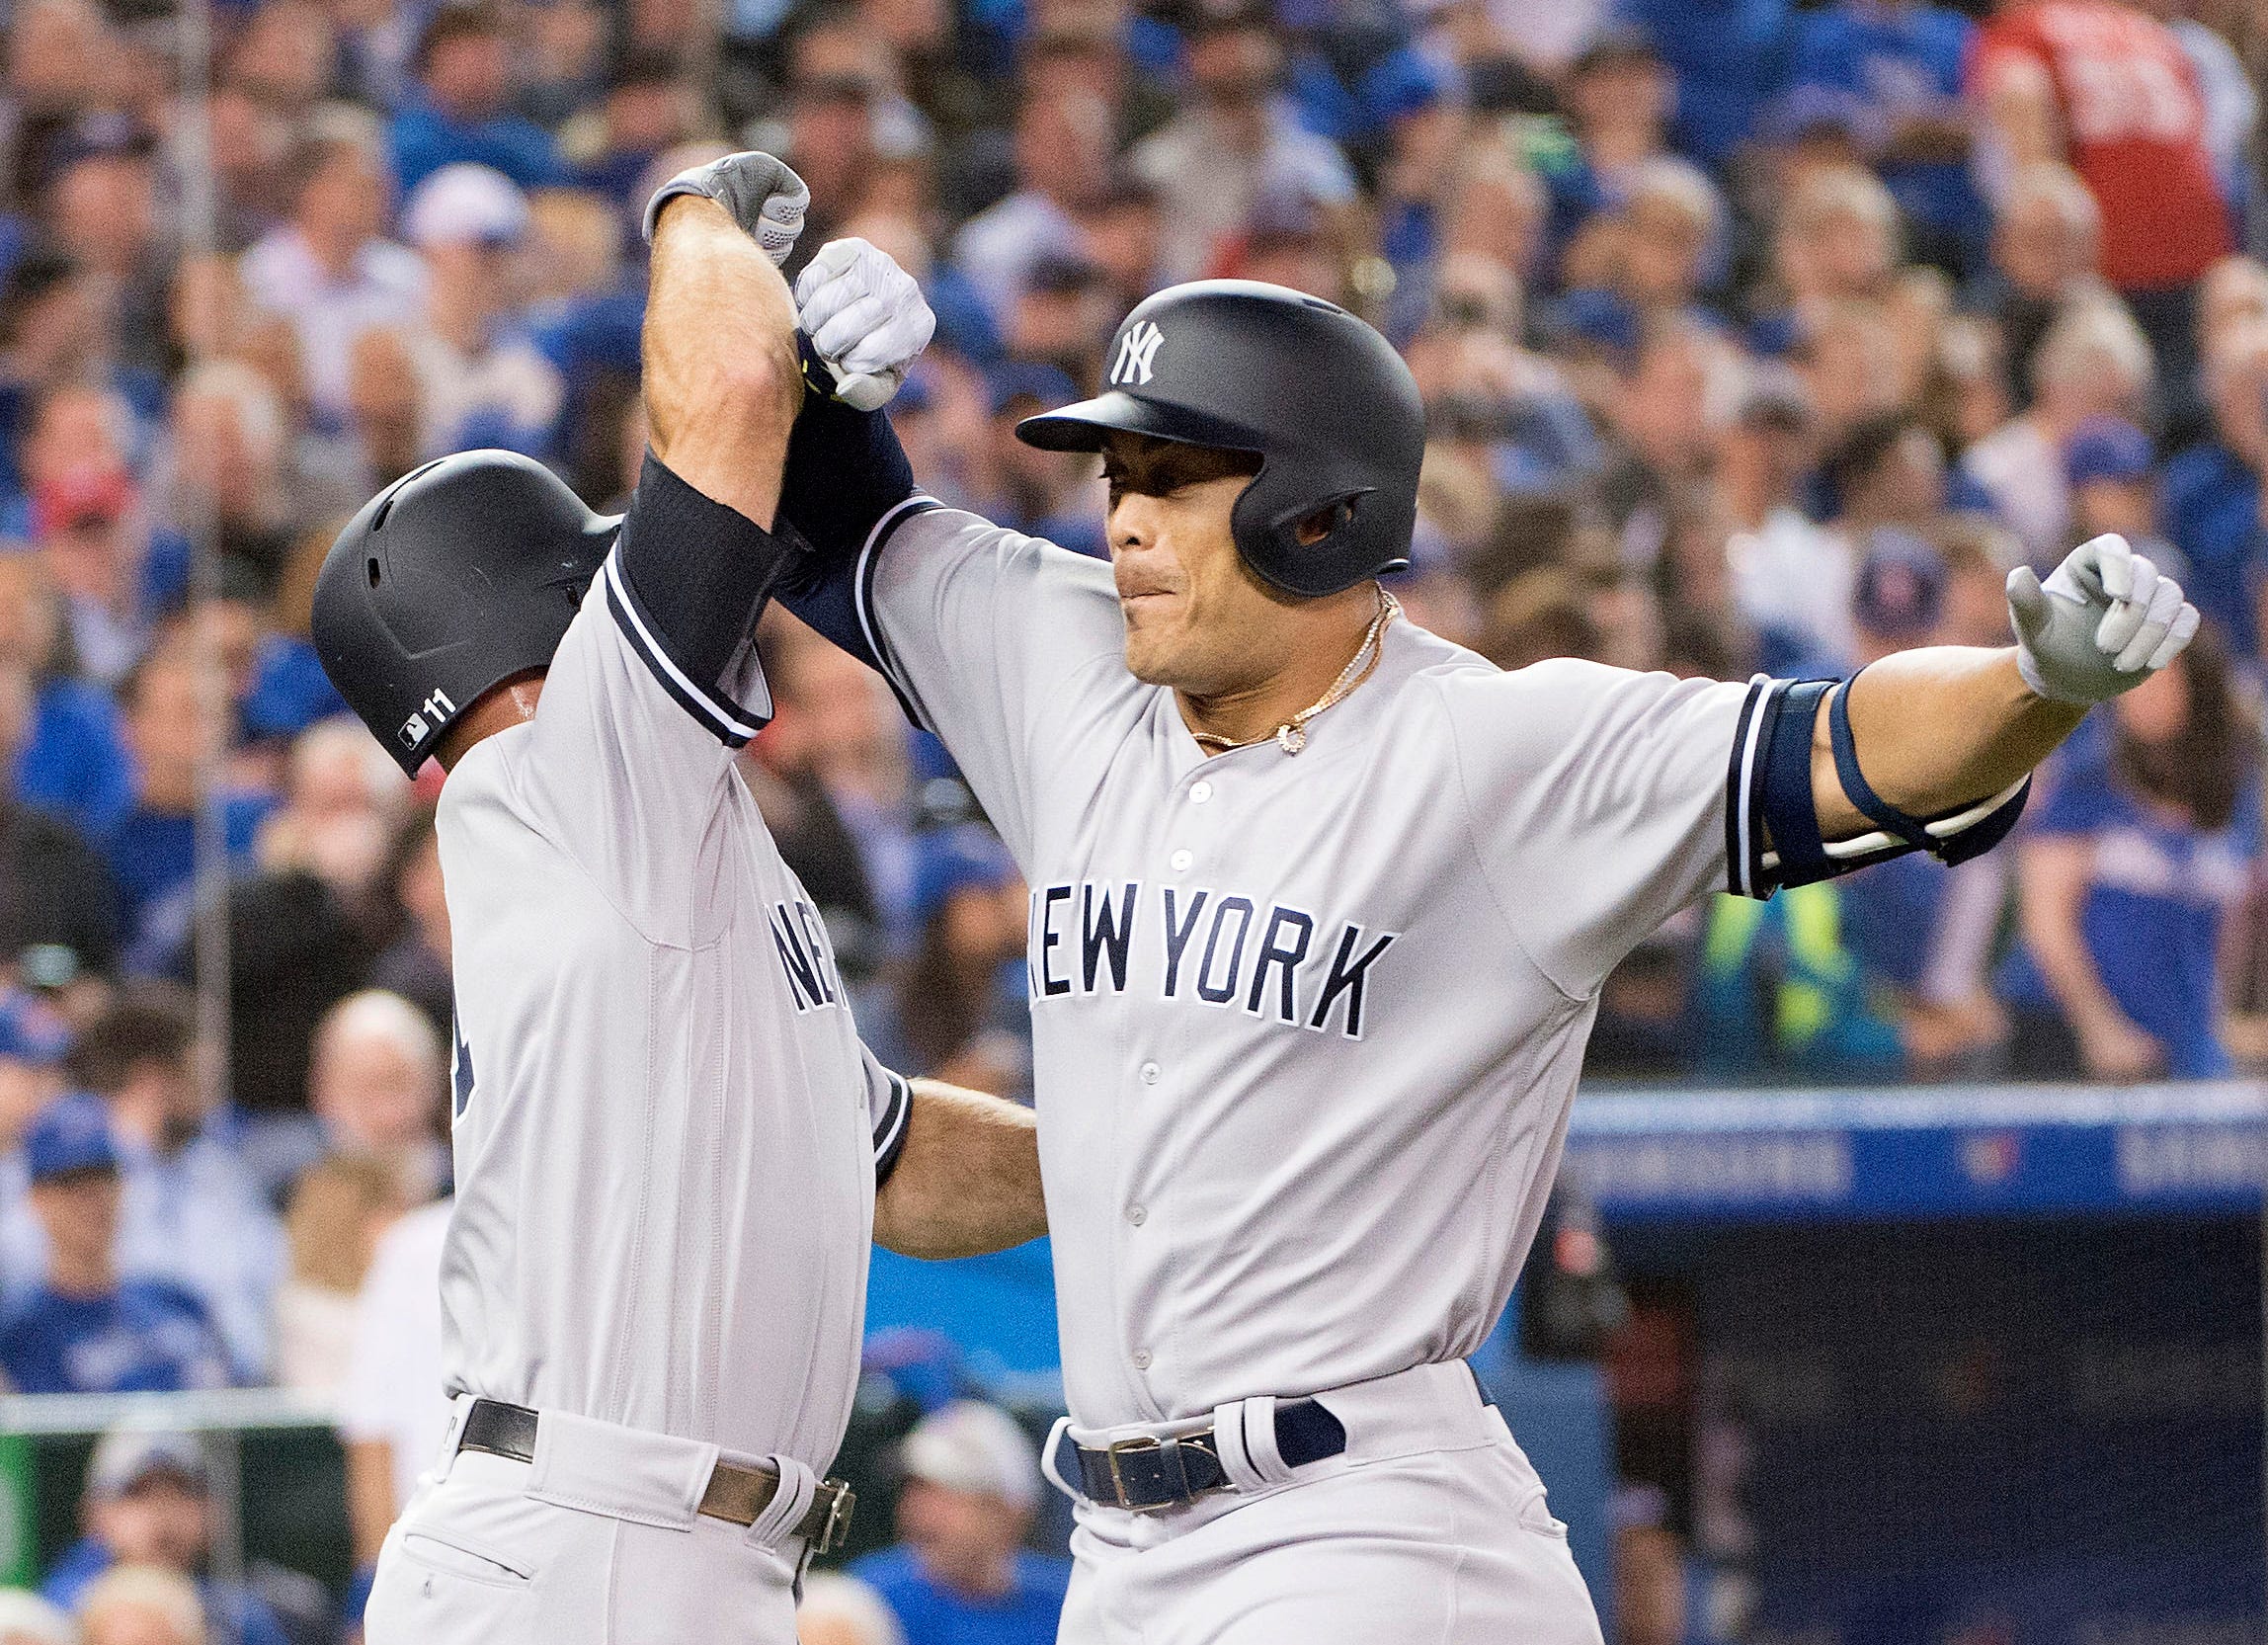 New York Yankees right fielder Giancarlo Stanton, right, celebrates a two run home run in the first inning with New York Yankees left fielder Brett Gardner during the Toronto Blue Jays home opener at Rogers Centre in Toronto.